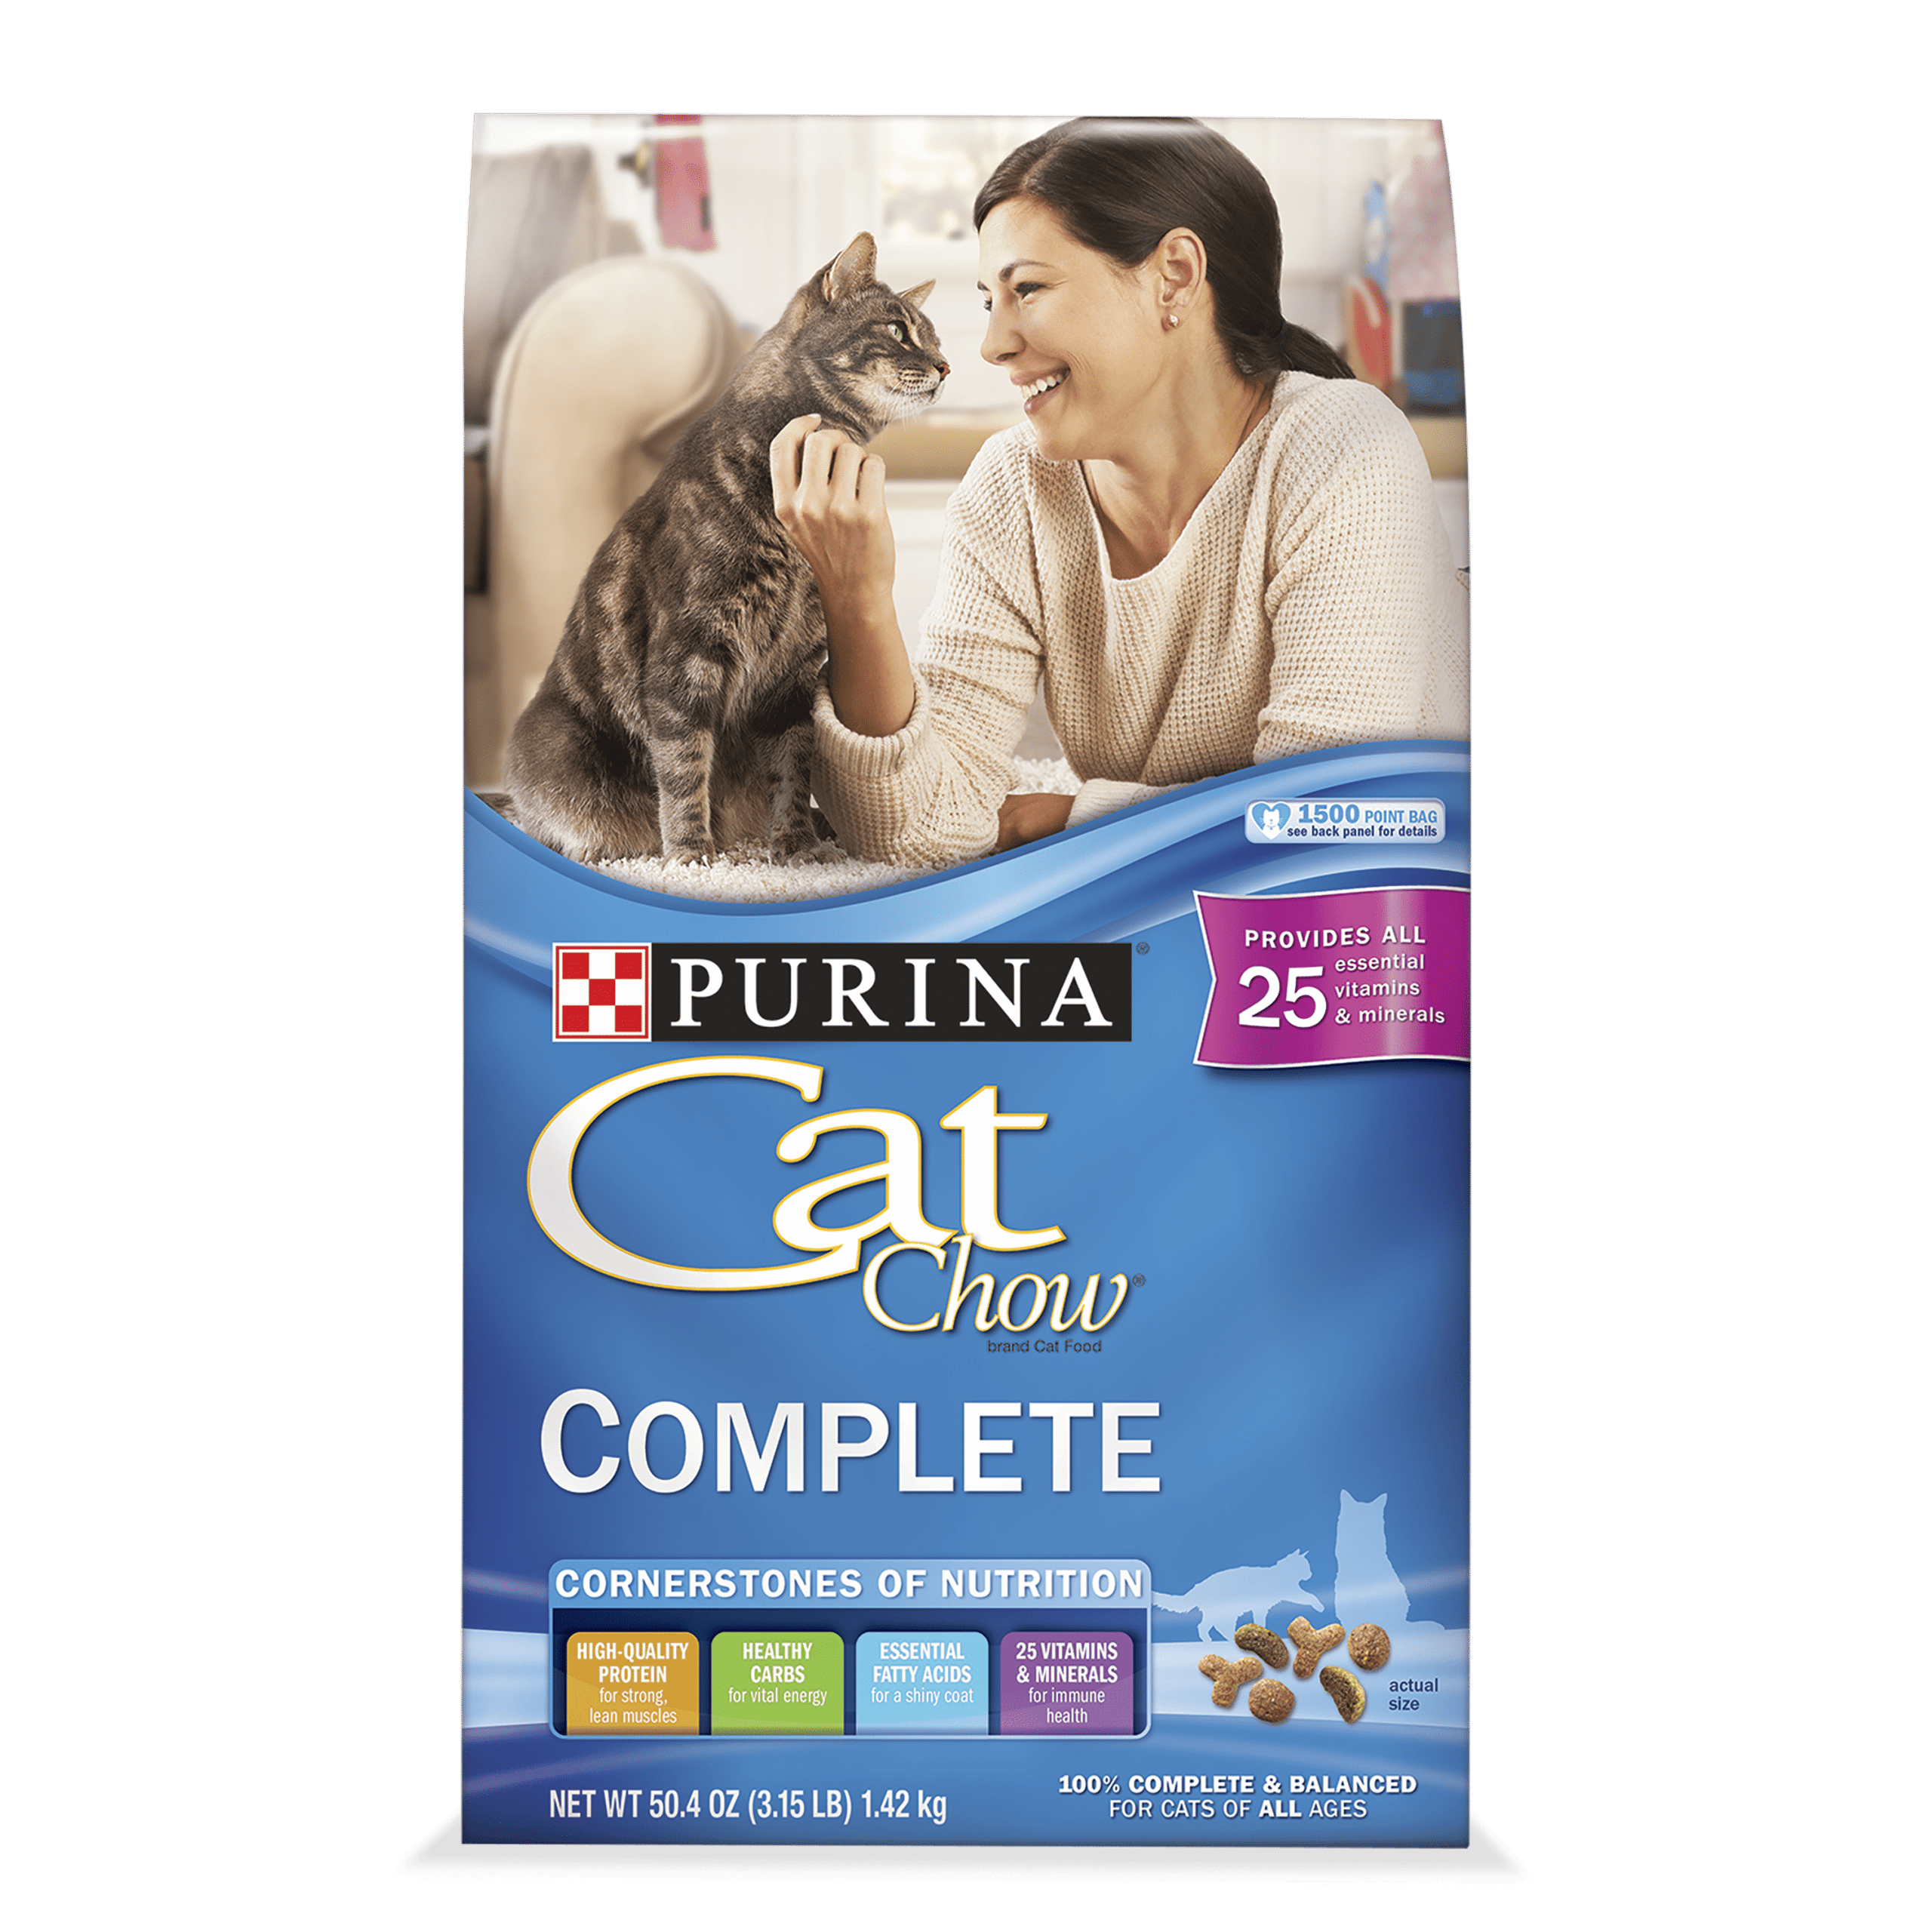 Purina Cat Chow Dry Cat Food, Complete, 3.15 lb. Bag